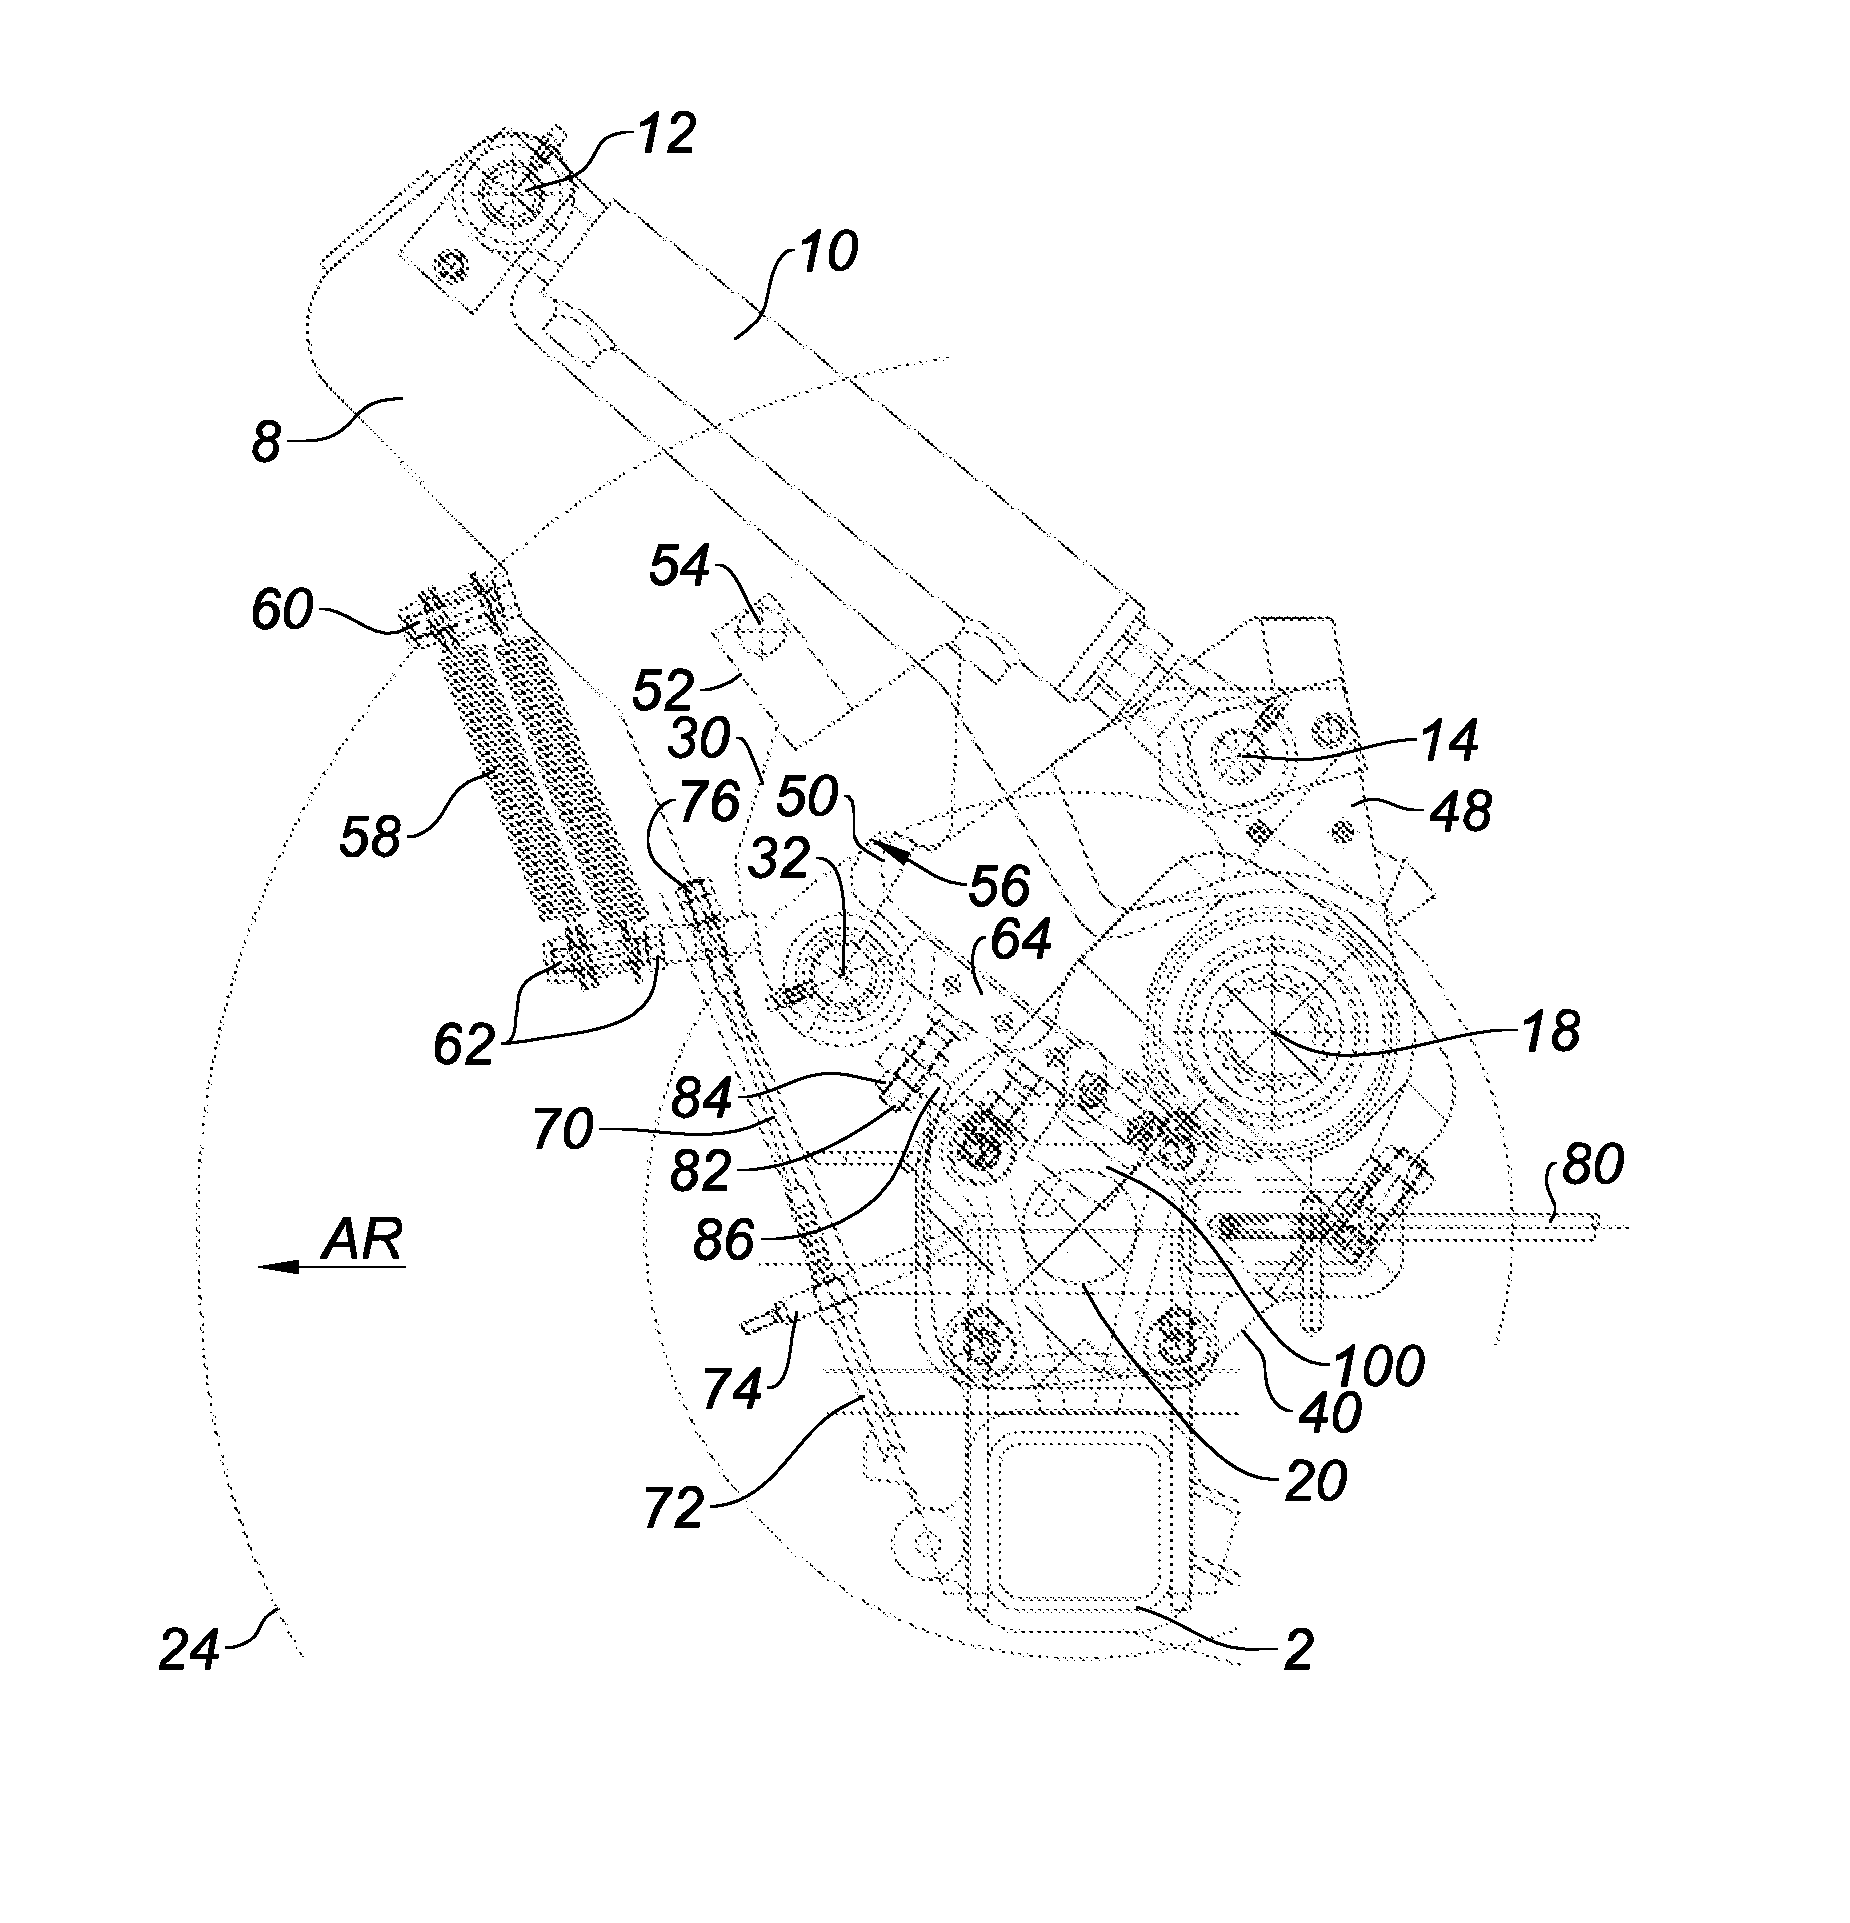 Device for lowering the body of a vehicle including a means for detecting the high position